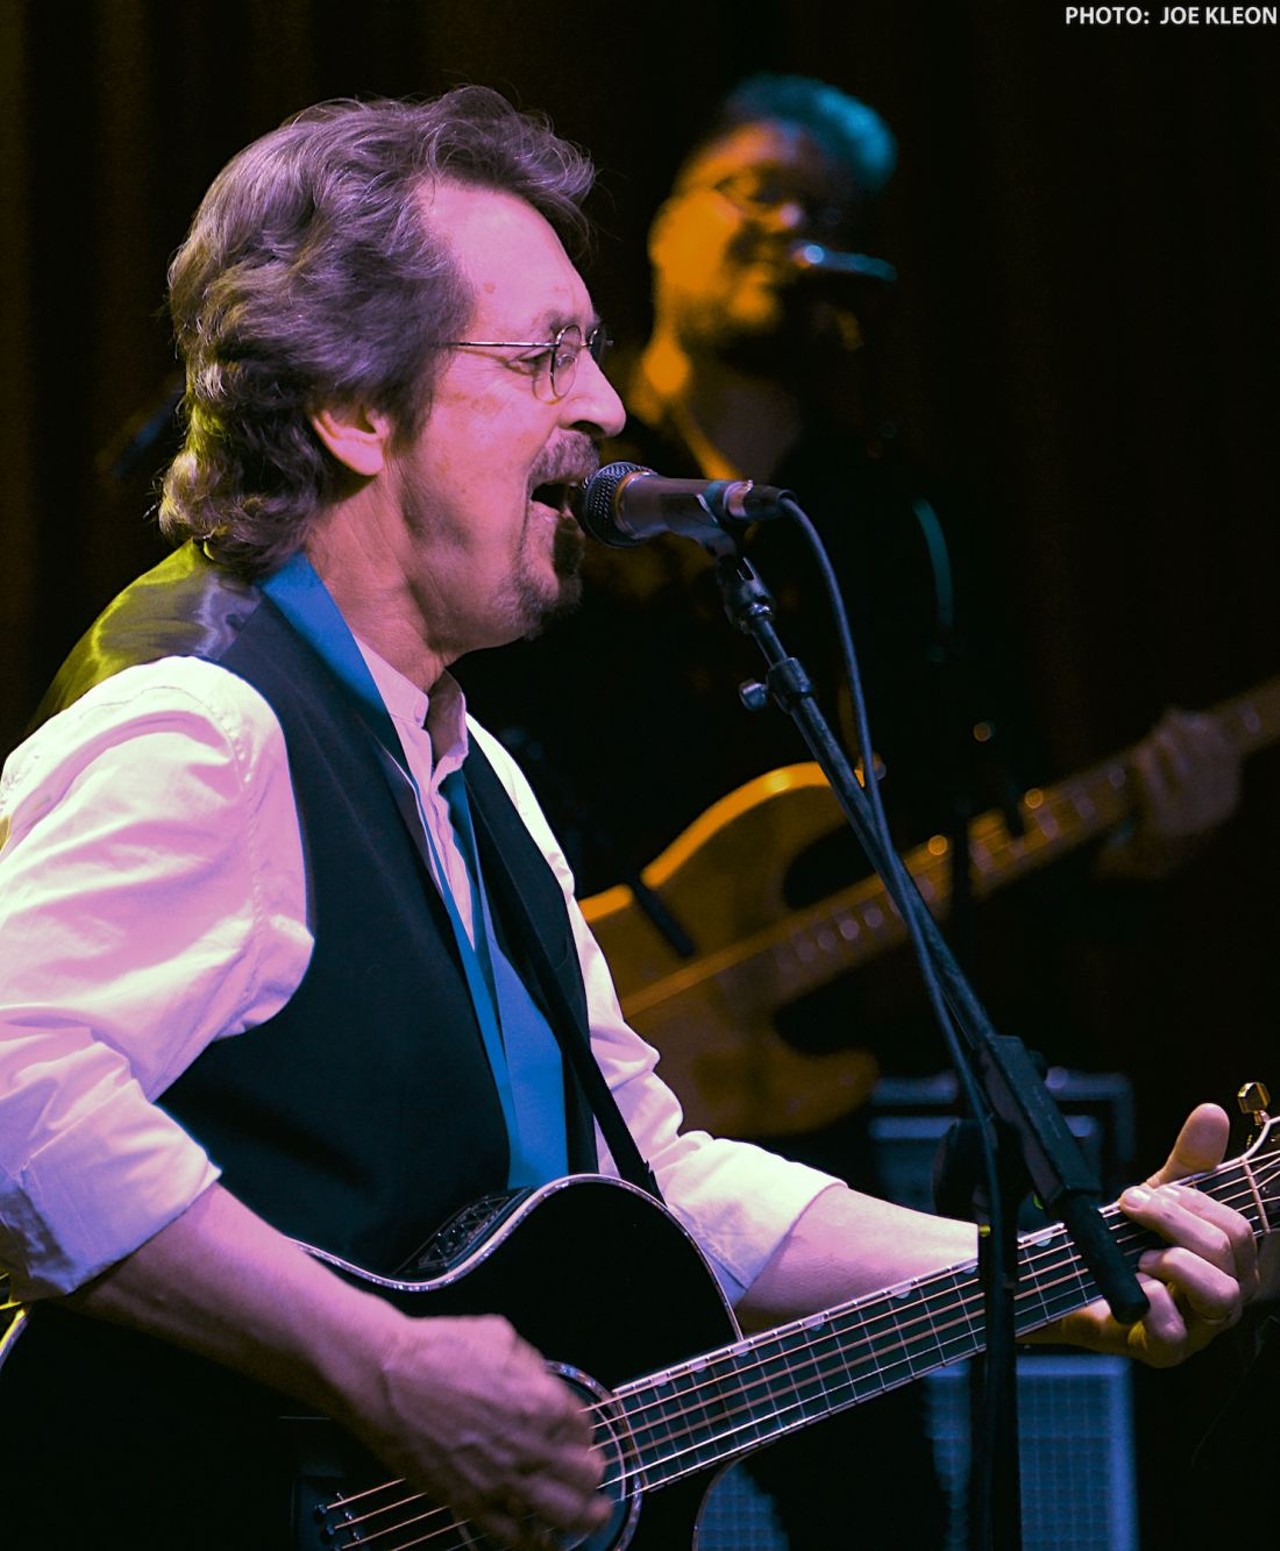 Photos From the Cleveland Arts Prize Concert Featuring an Acoustic Evening with Michael Stanley & Friends